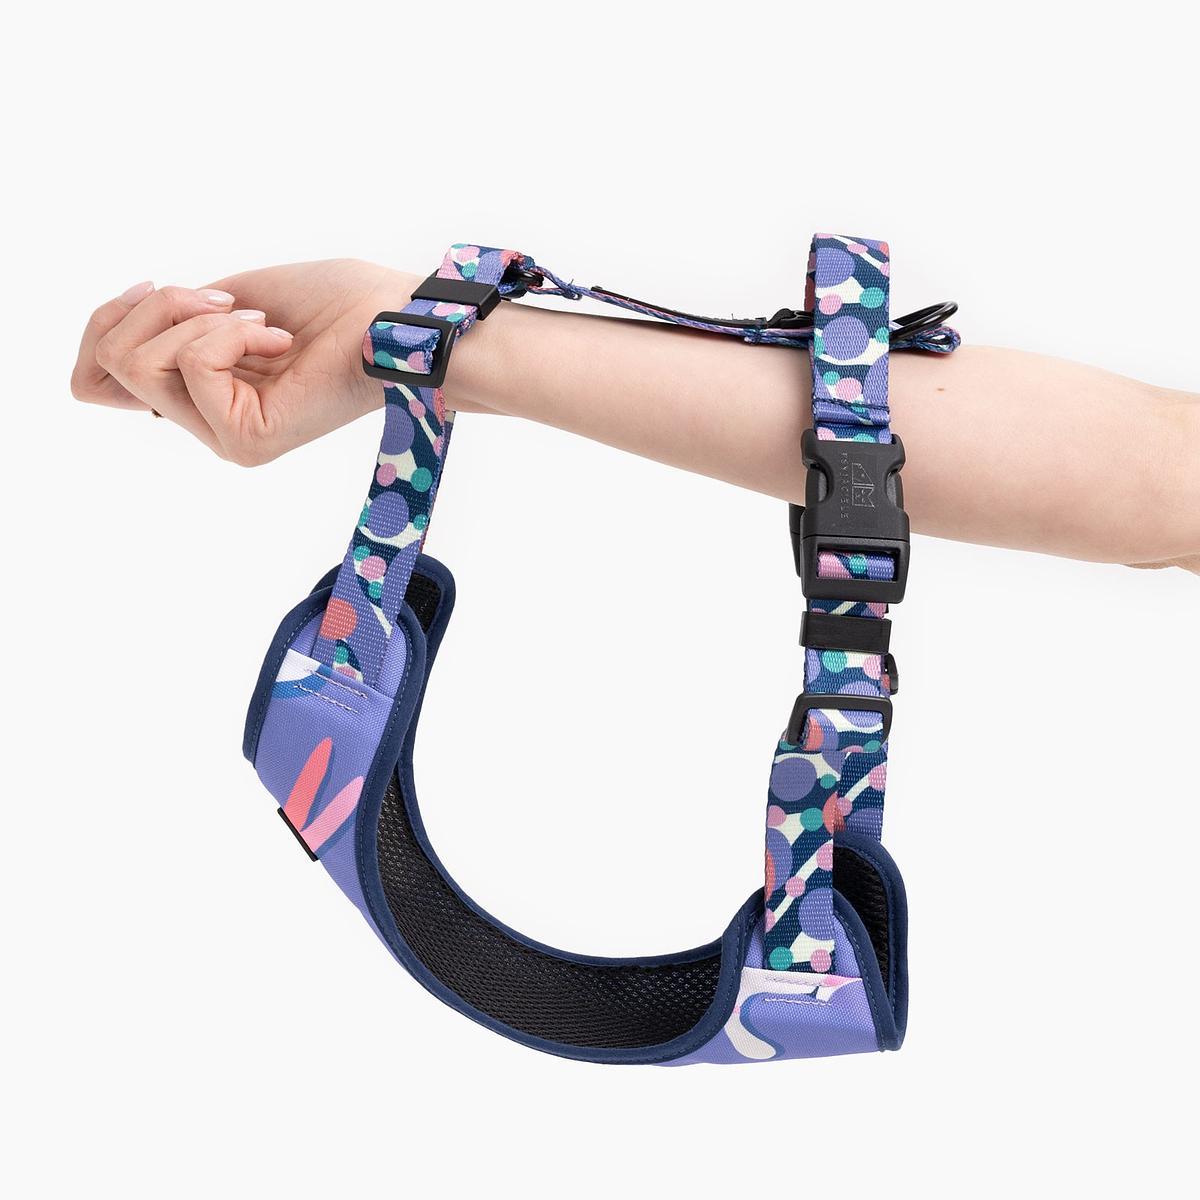 Stay-on pressure-free harness "Downward dog"